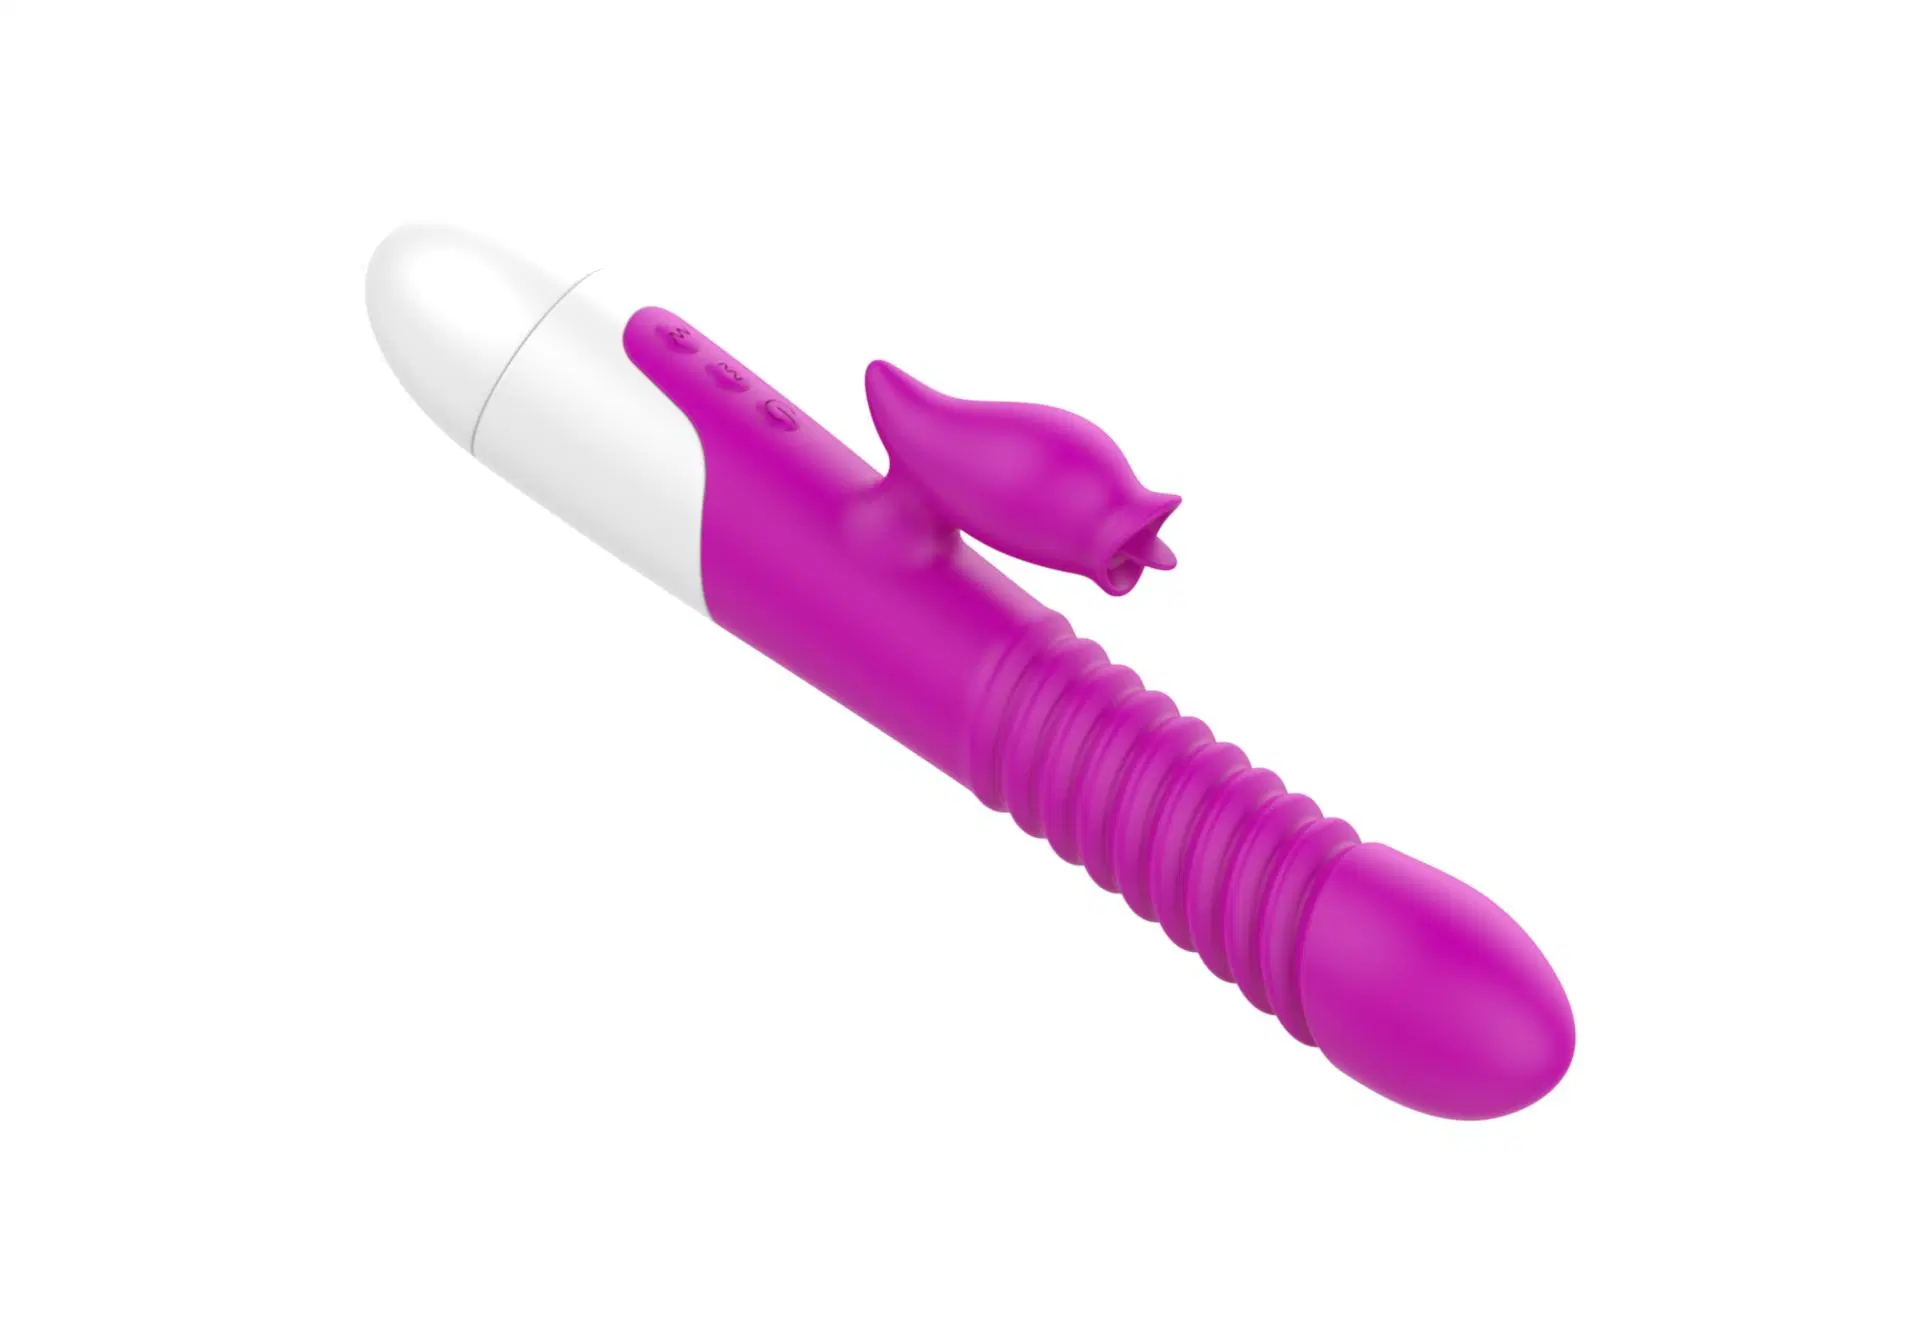 Vibrator G Spot Vagina Vibrator for Women Waterproof USB Charge Dildo Soft Silicone Sex Product Adult Toys